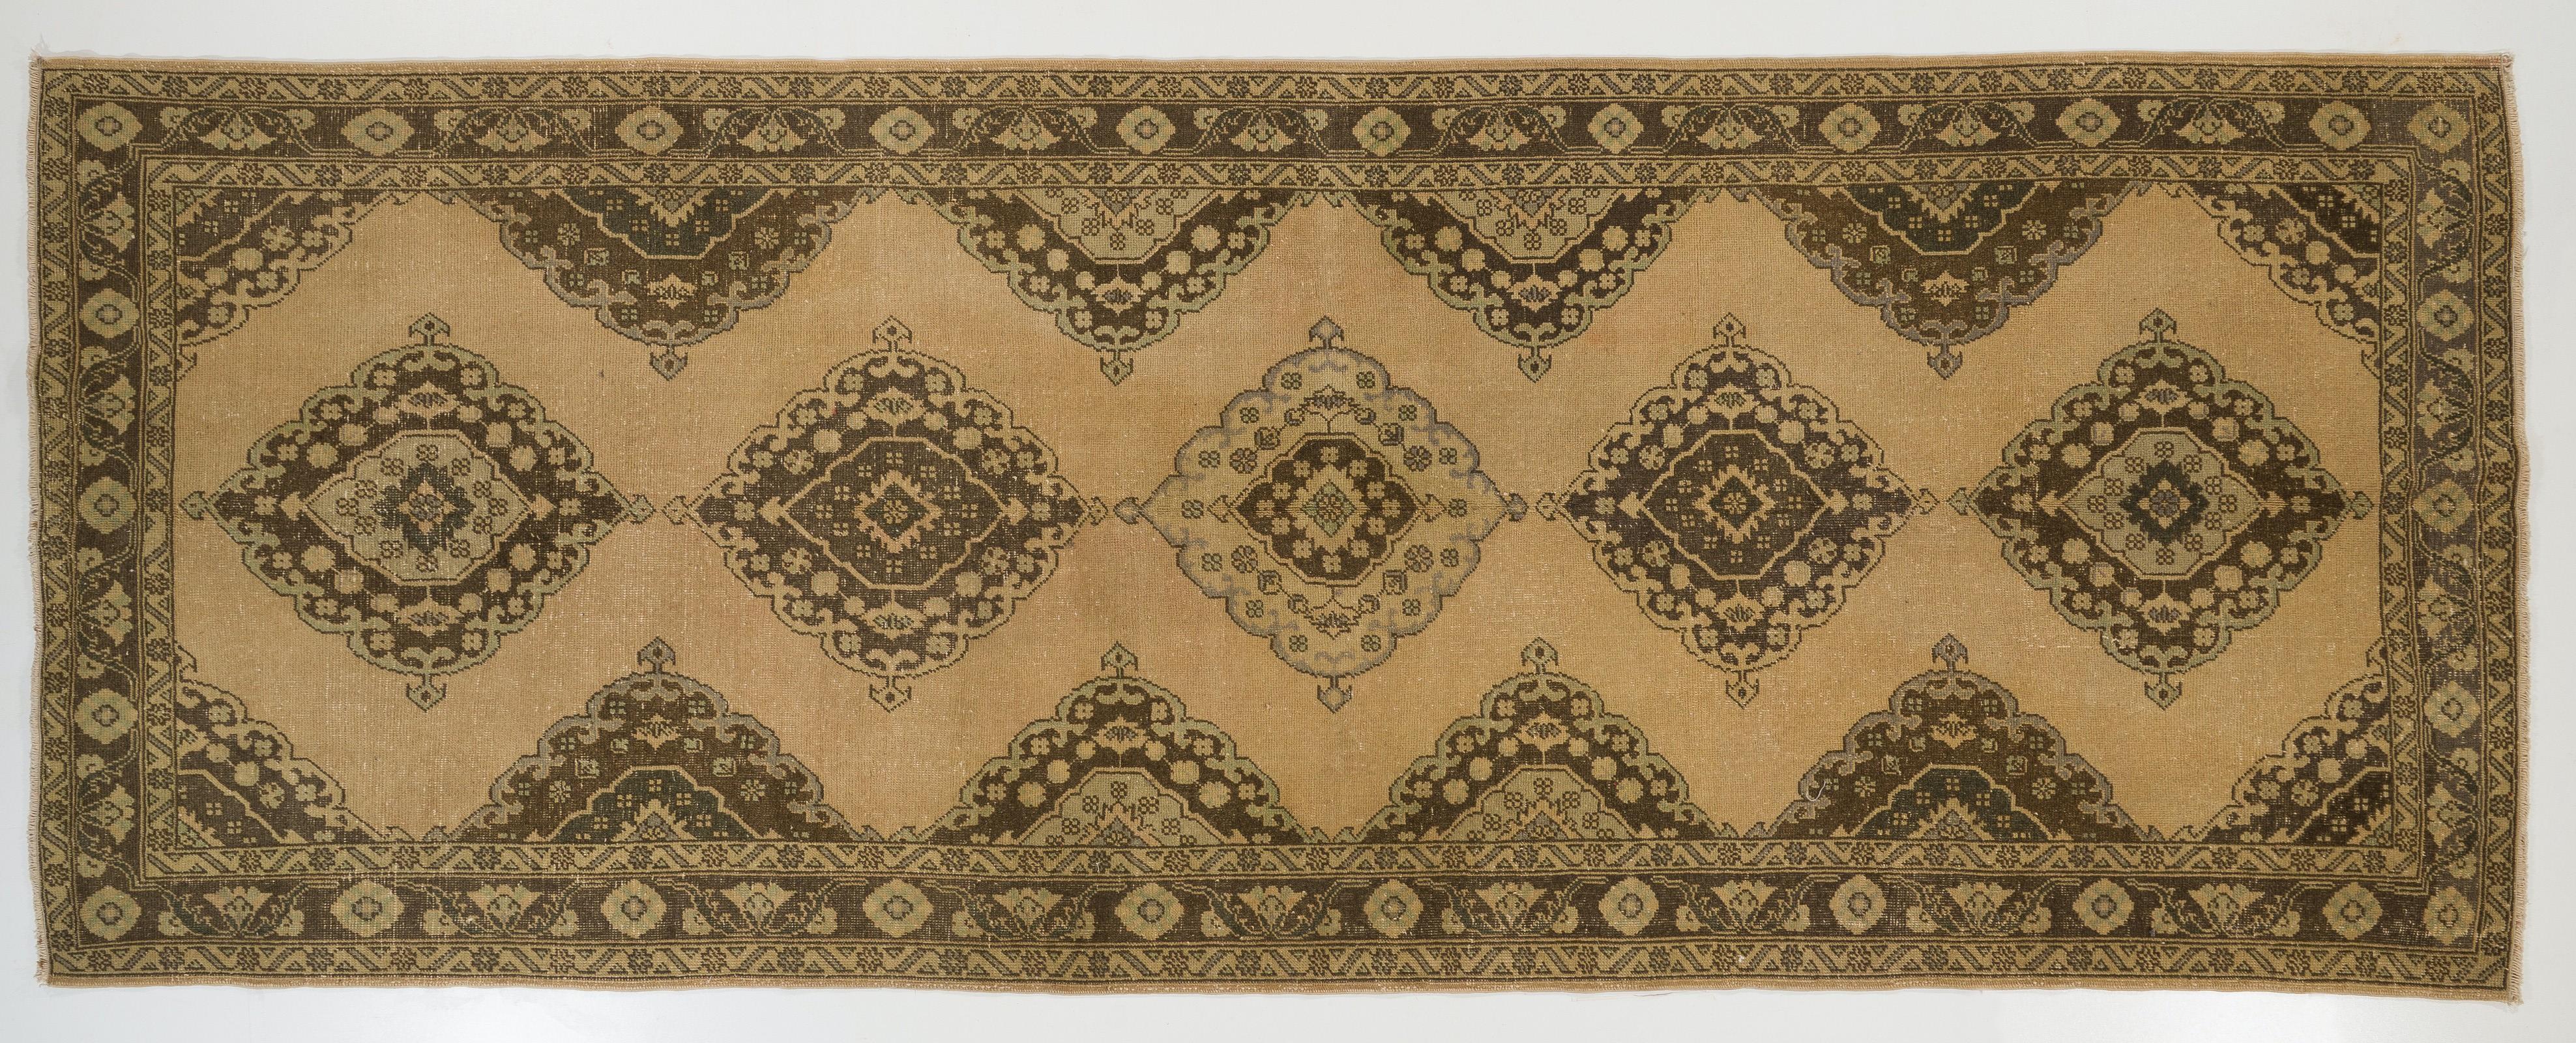 5x13.2 Ft Mid-Century Handmade Turkish Runner Rug for Hallway Decor, circa 1950 In Good Condition For Sale In Philadelphia, PA